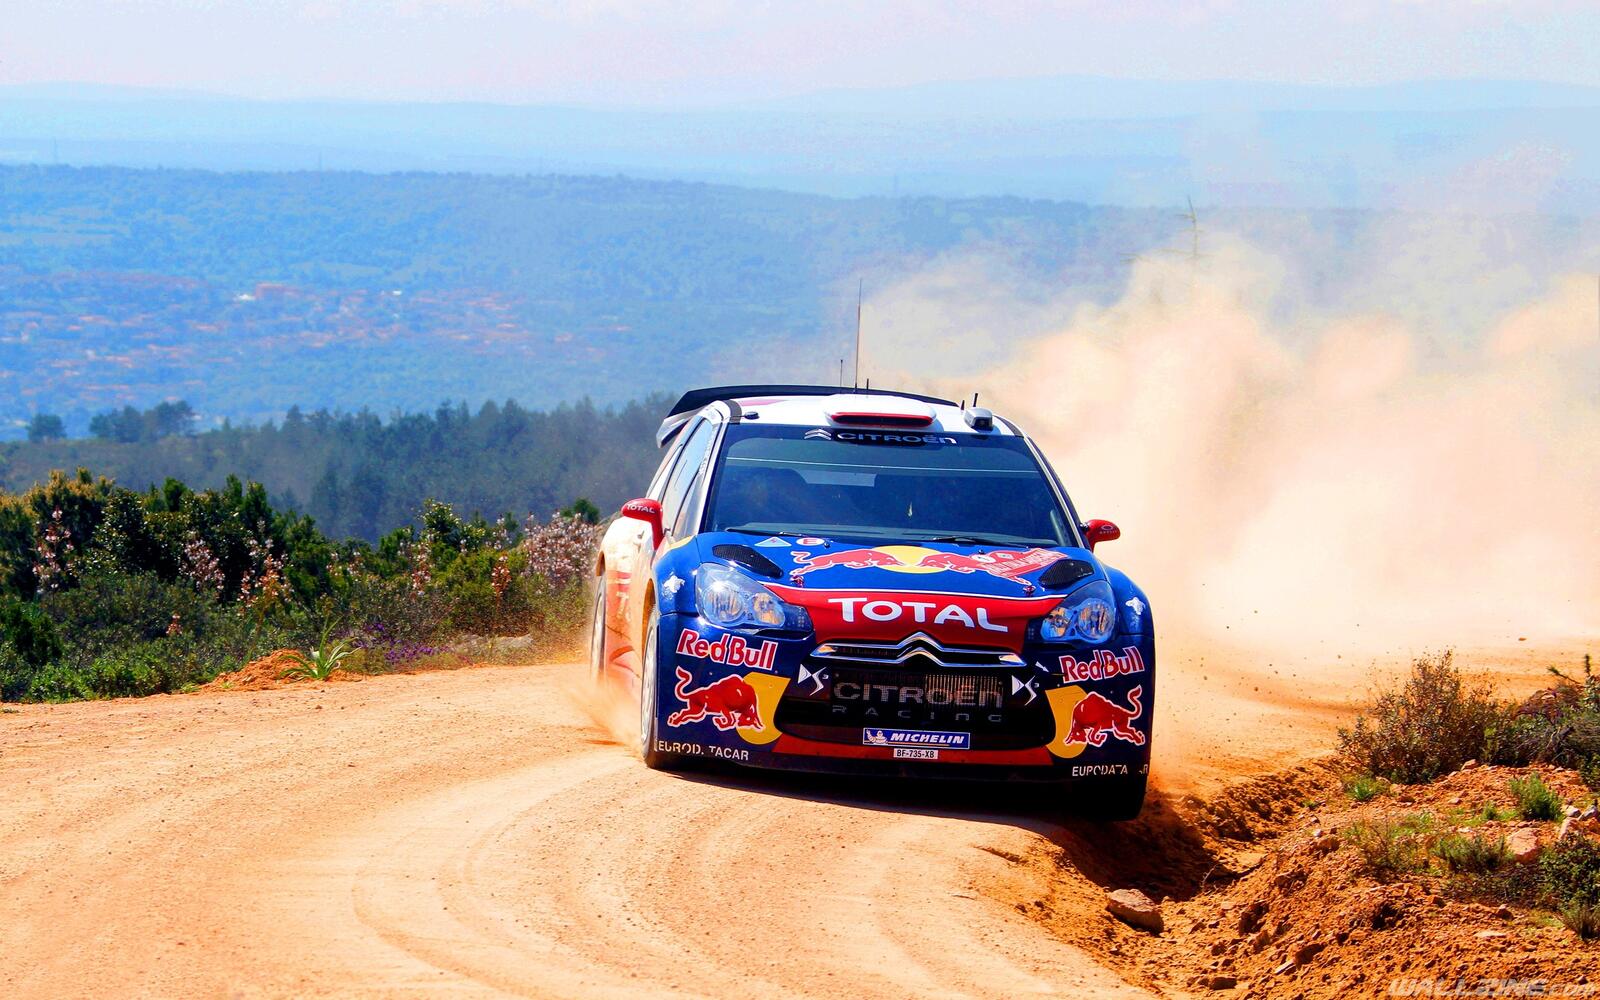 Free photo Citroen, Citroen DS3 at the rally with Red Bull ad.